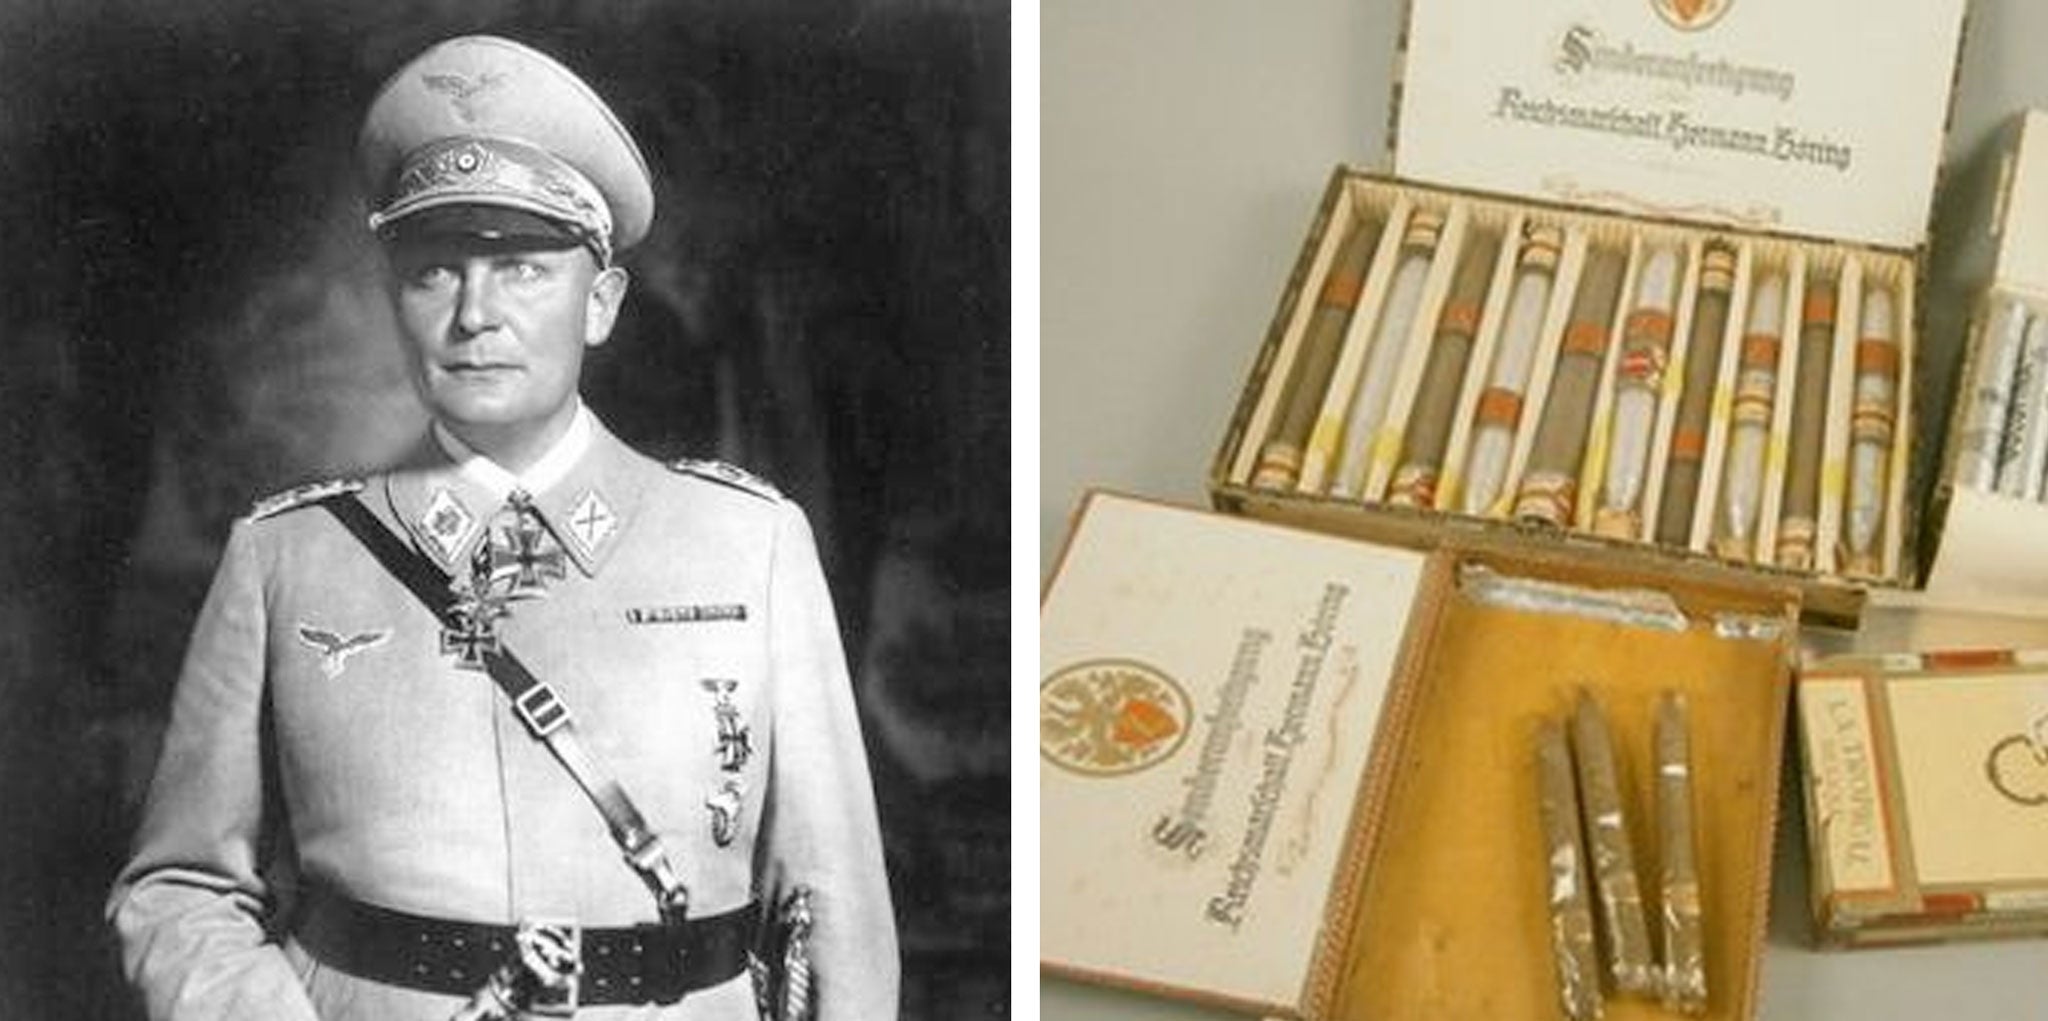 A collection of cigars tailor-made for Hermann Goering have gone on sale.